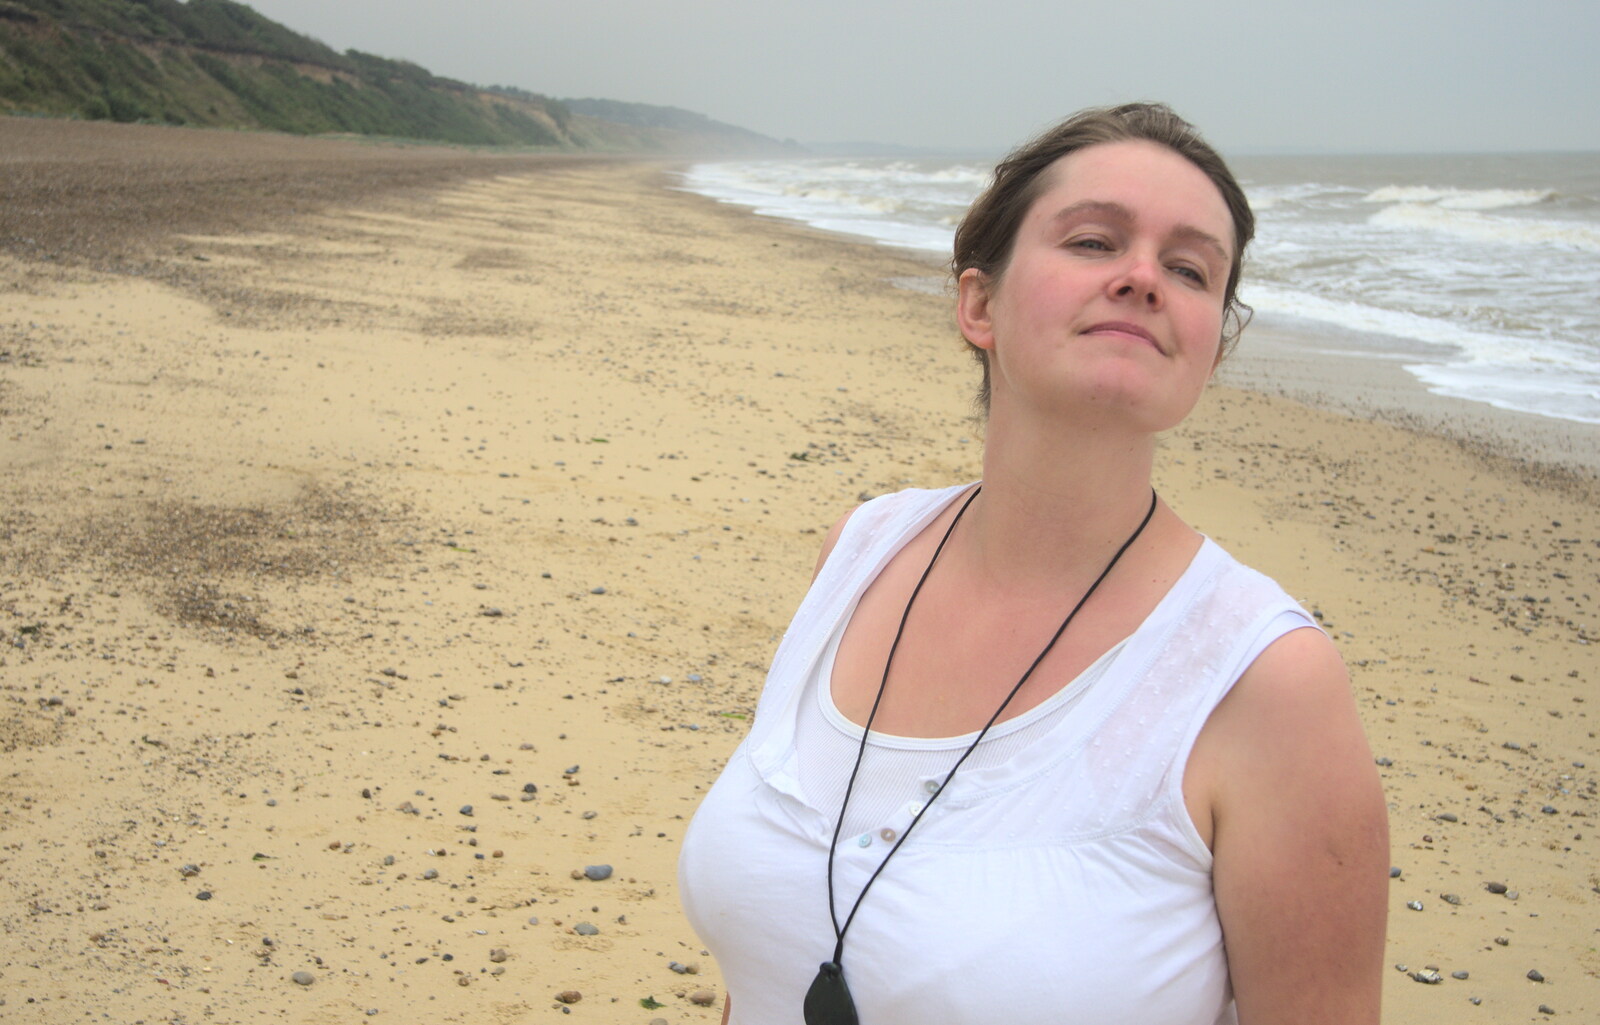 Isobel looks down the beach from Camping by the Seaside, Cliff House, Dunwich, Suffolk - 15th August 2012